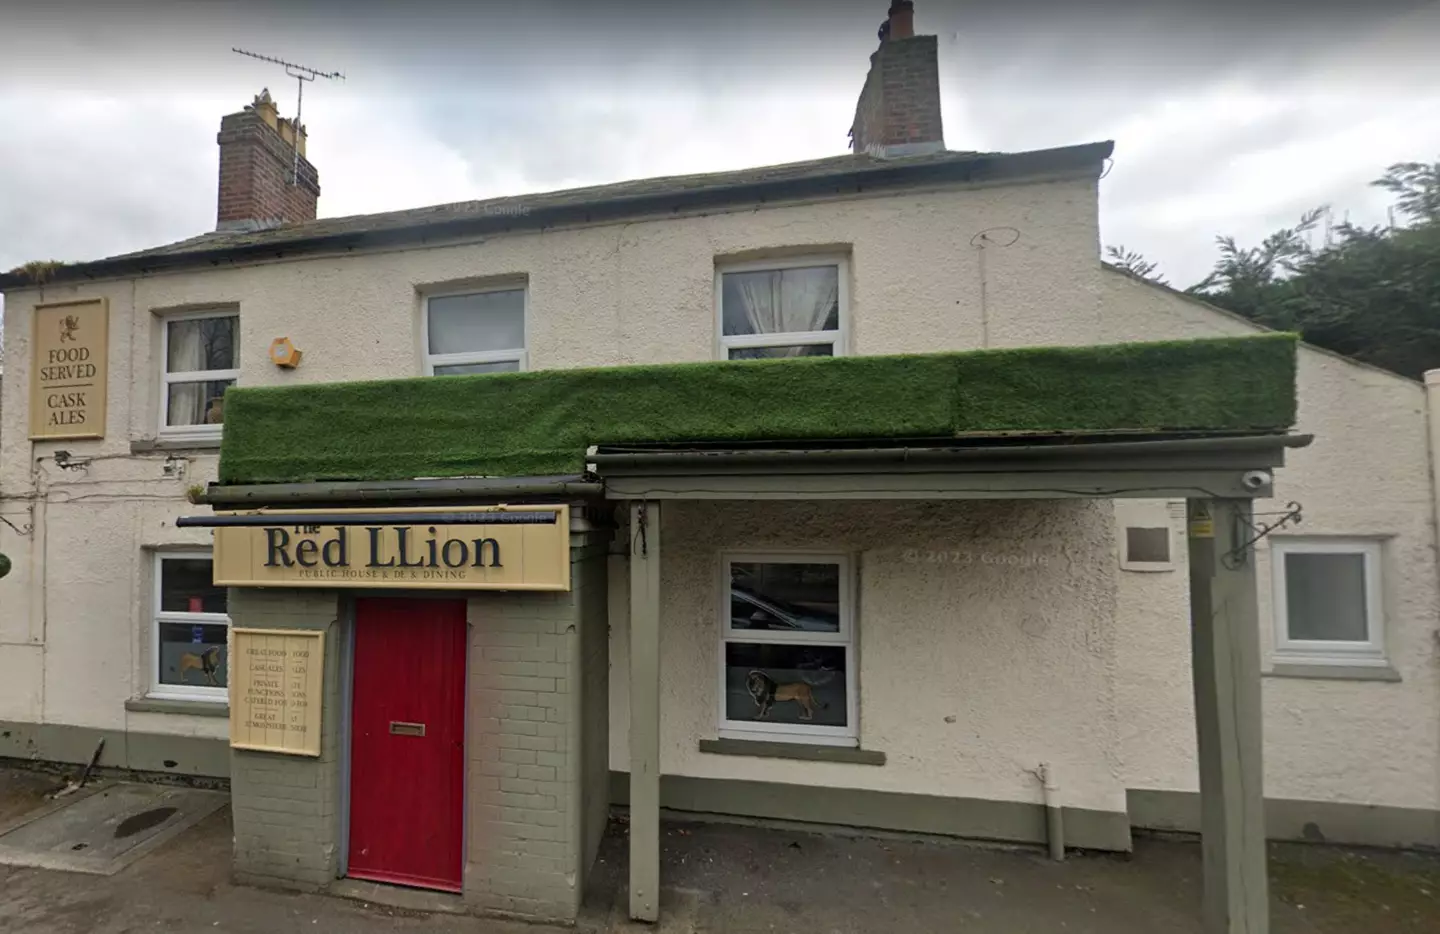 The Red Lion is Reynolds' other choice of boozer.